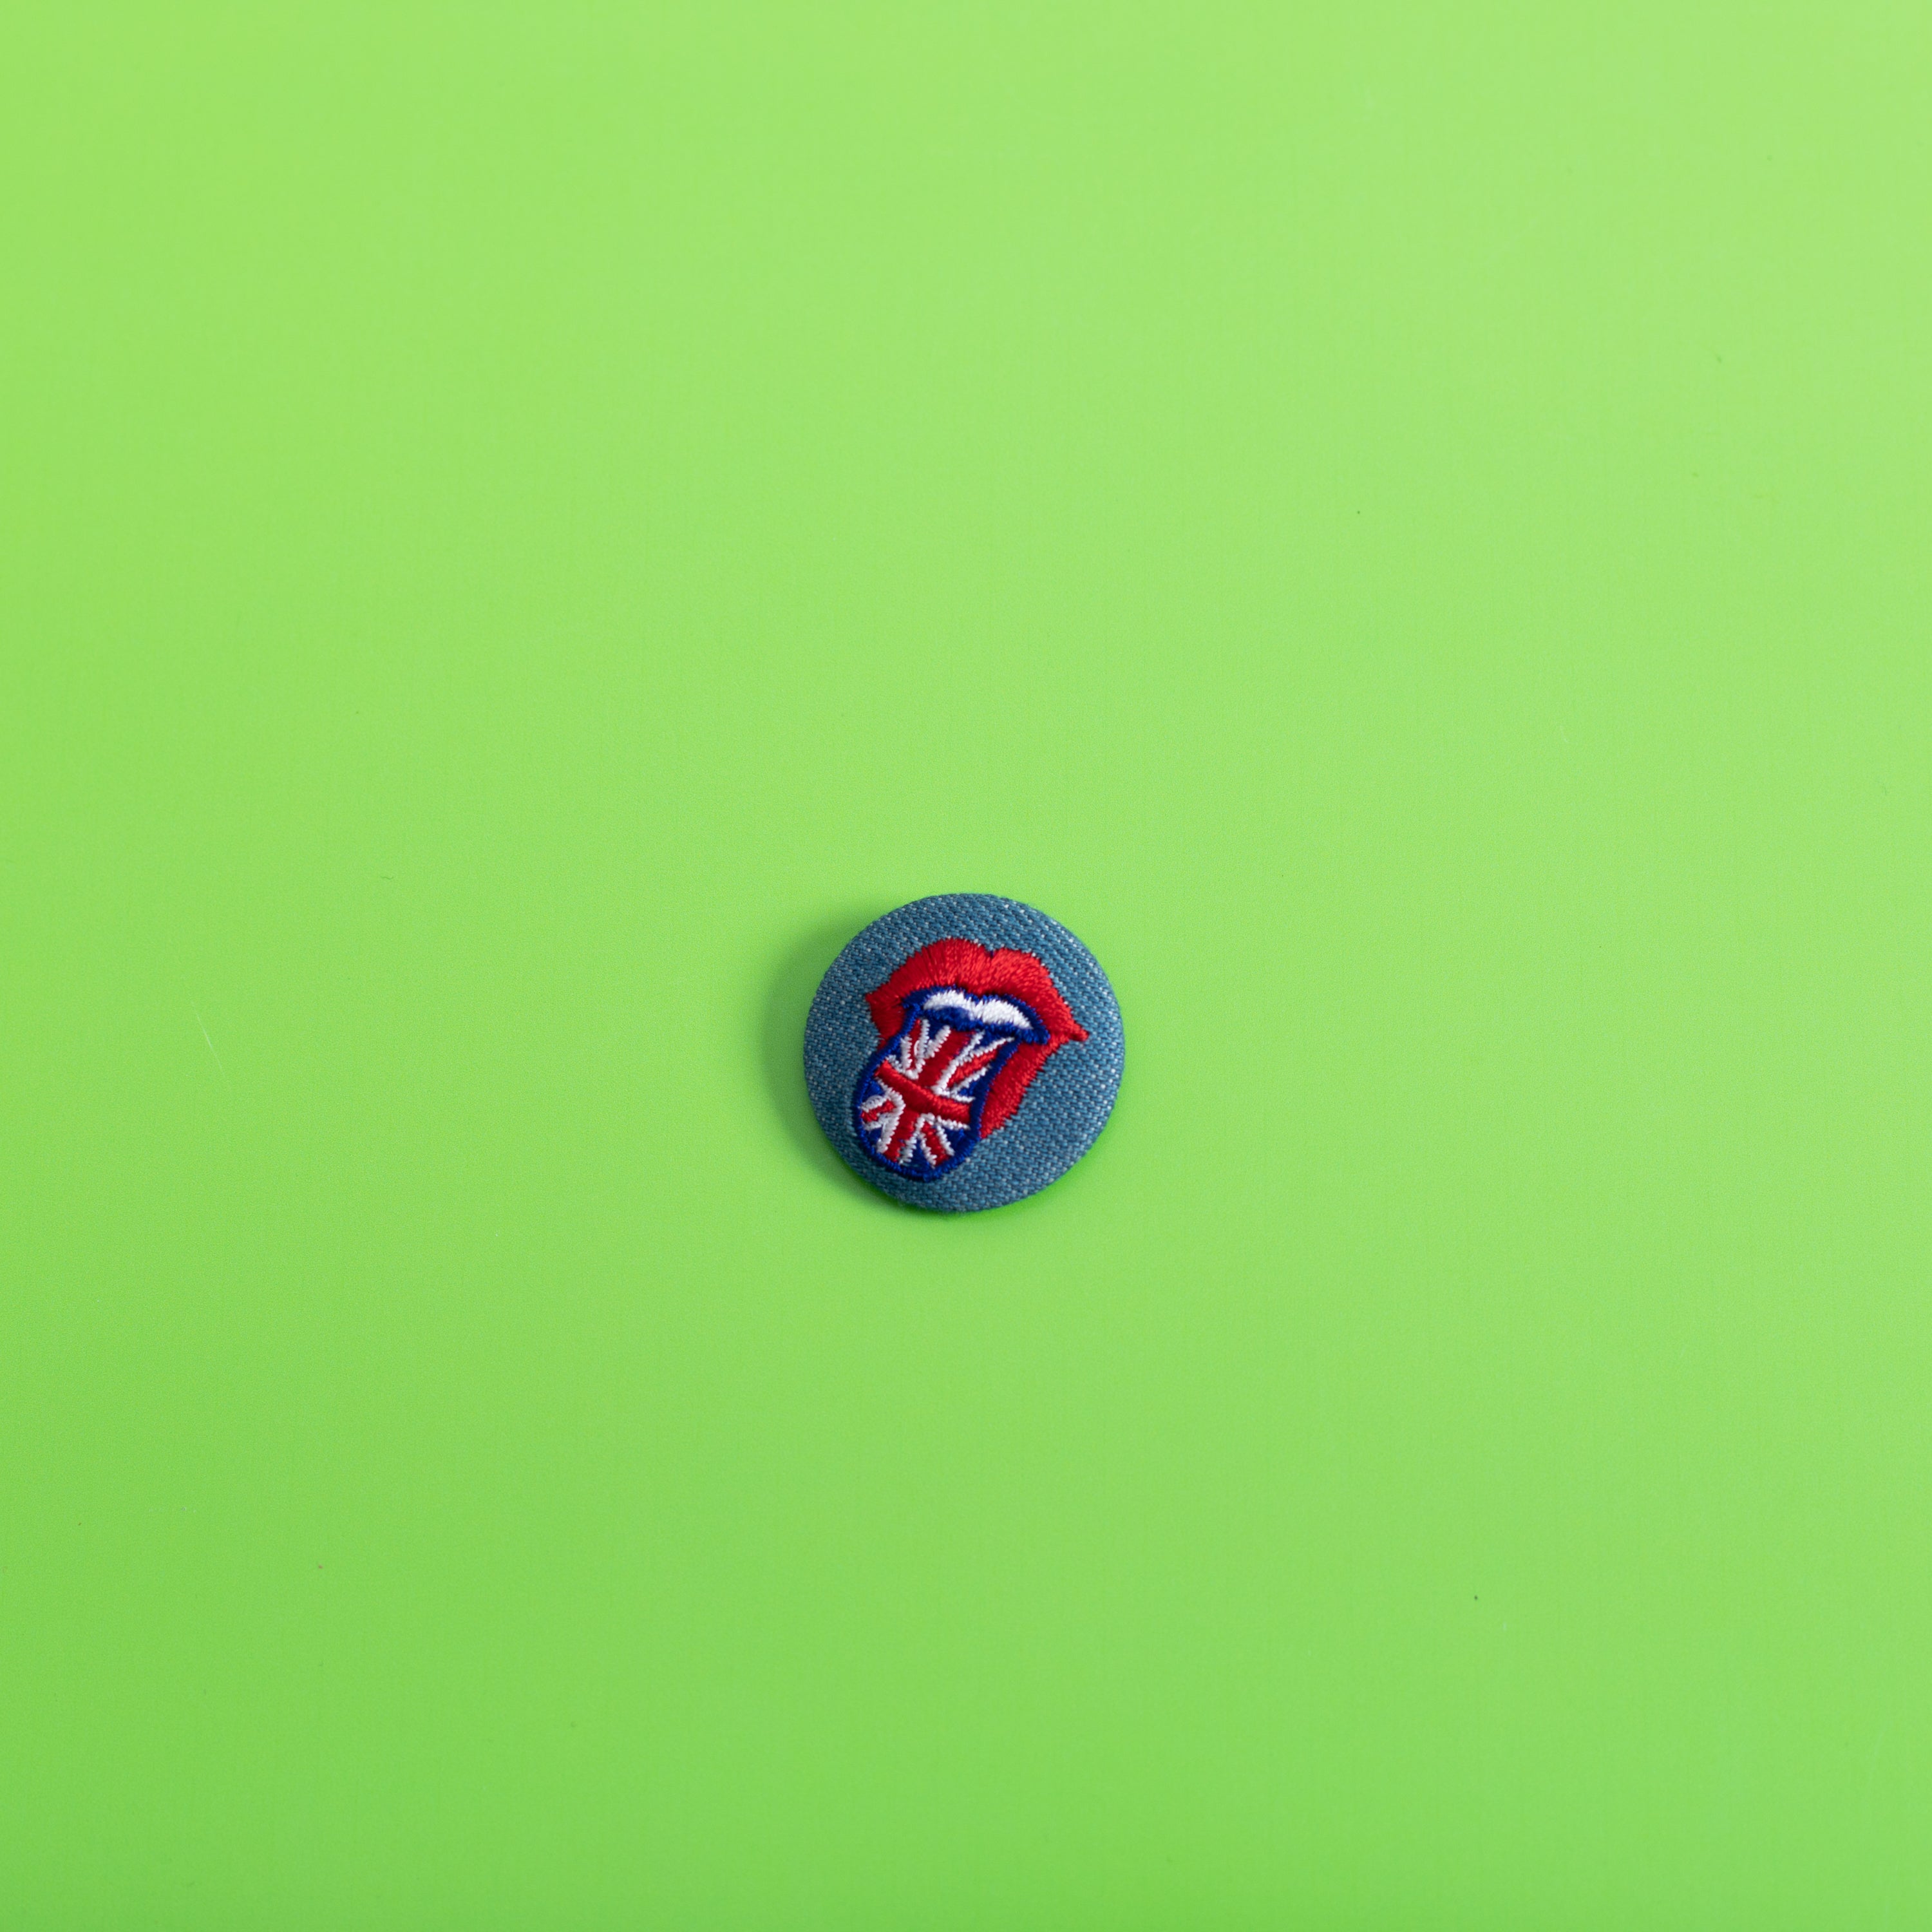 It's Only Rock 'N Roll Button Pin,FlairMindFlowers